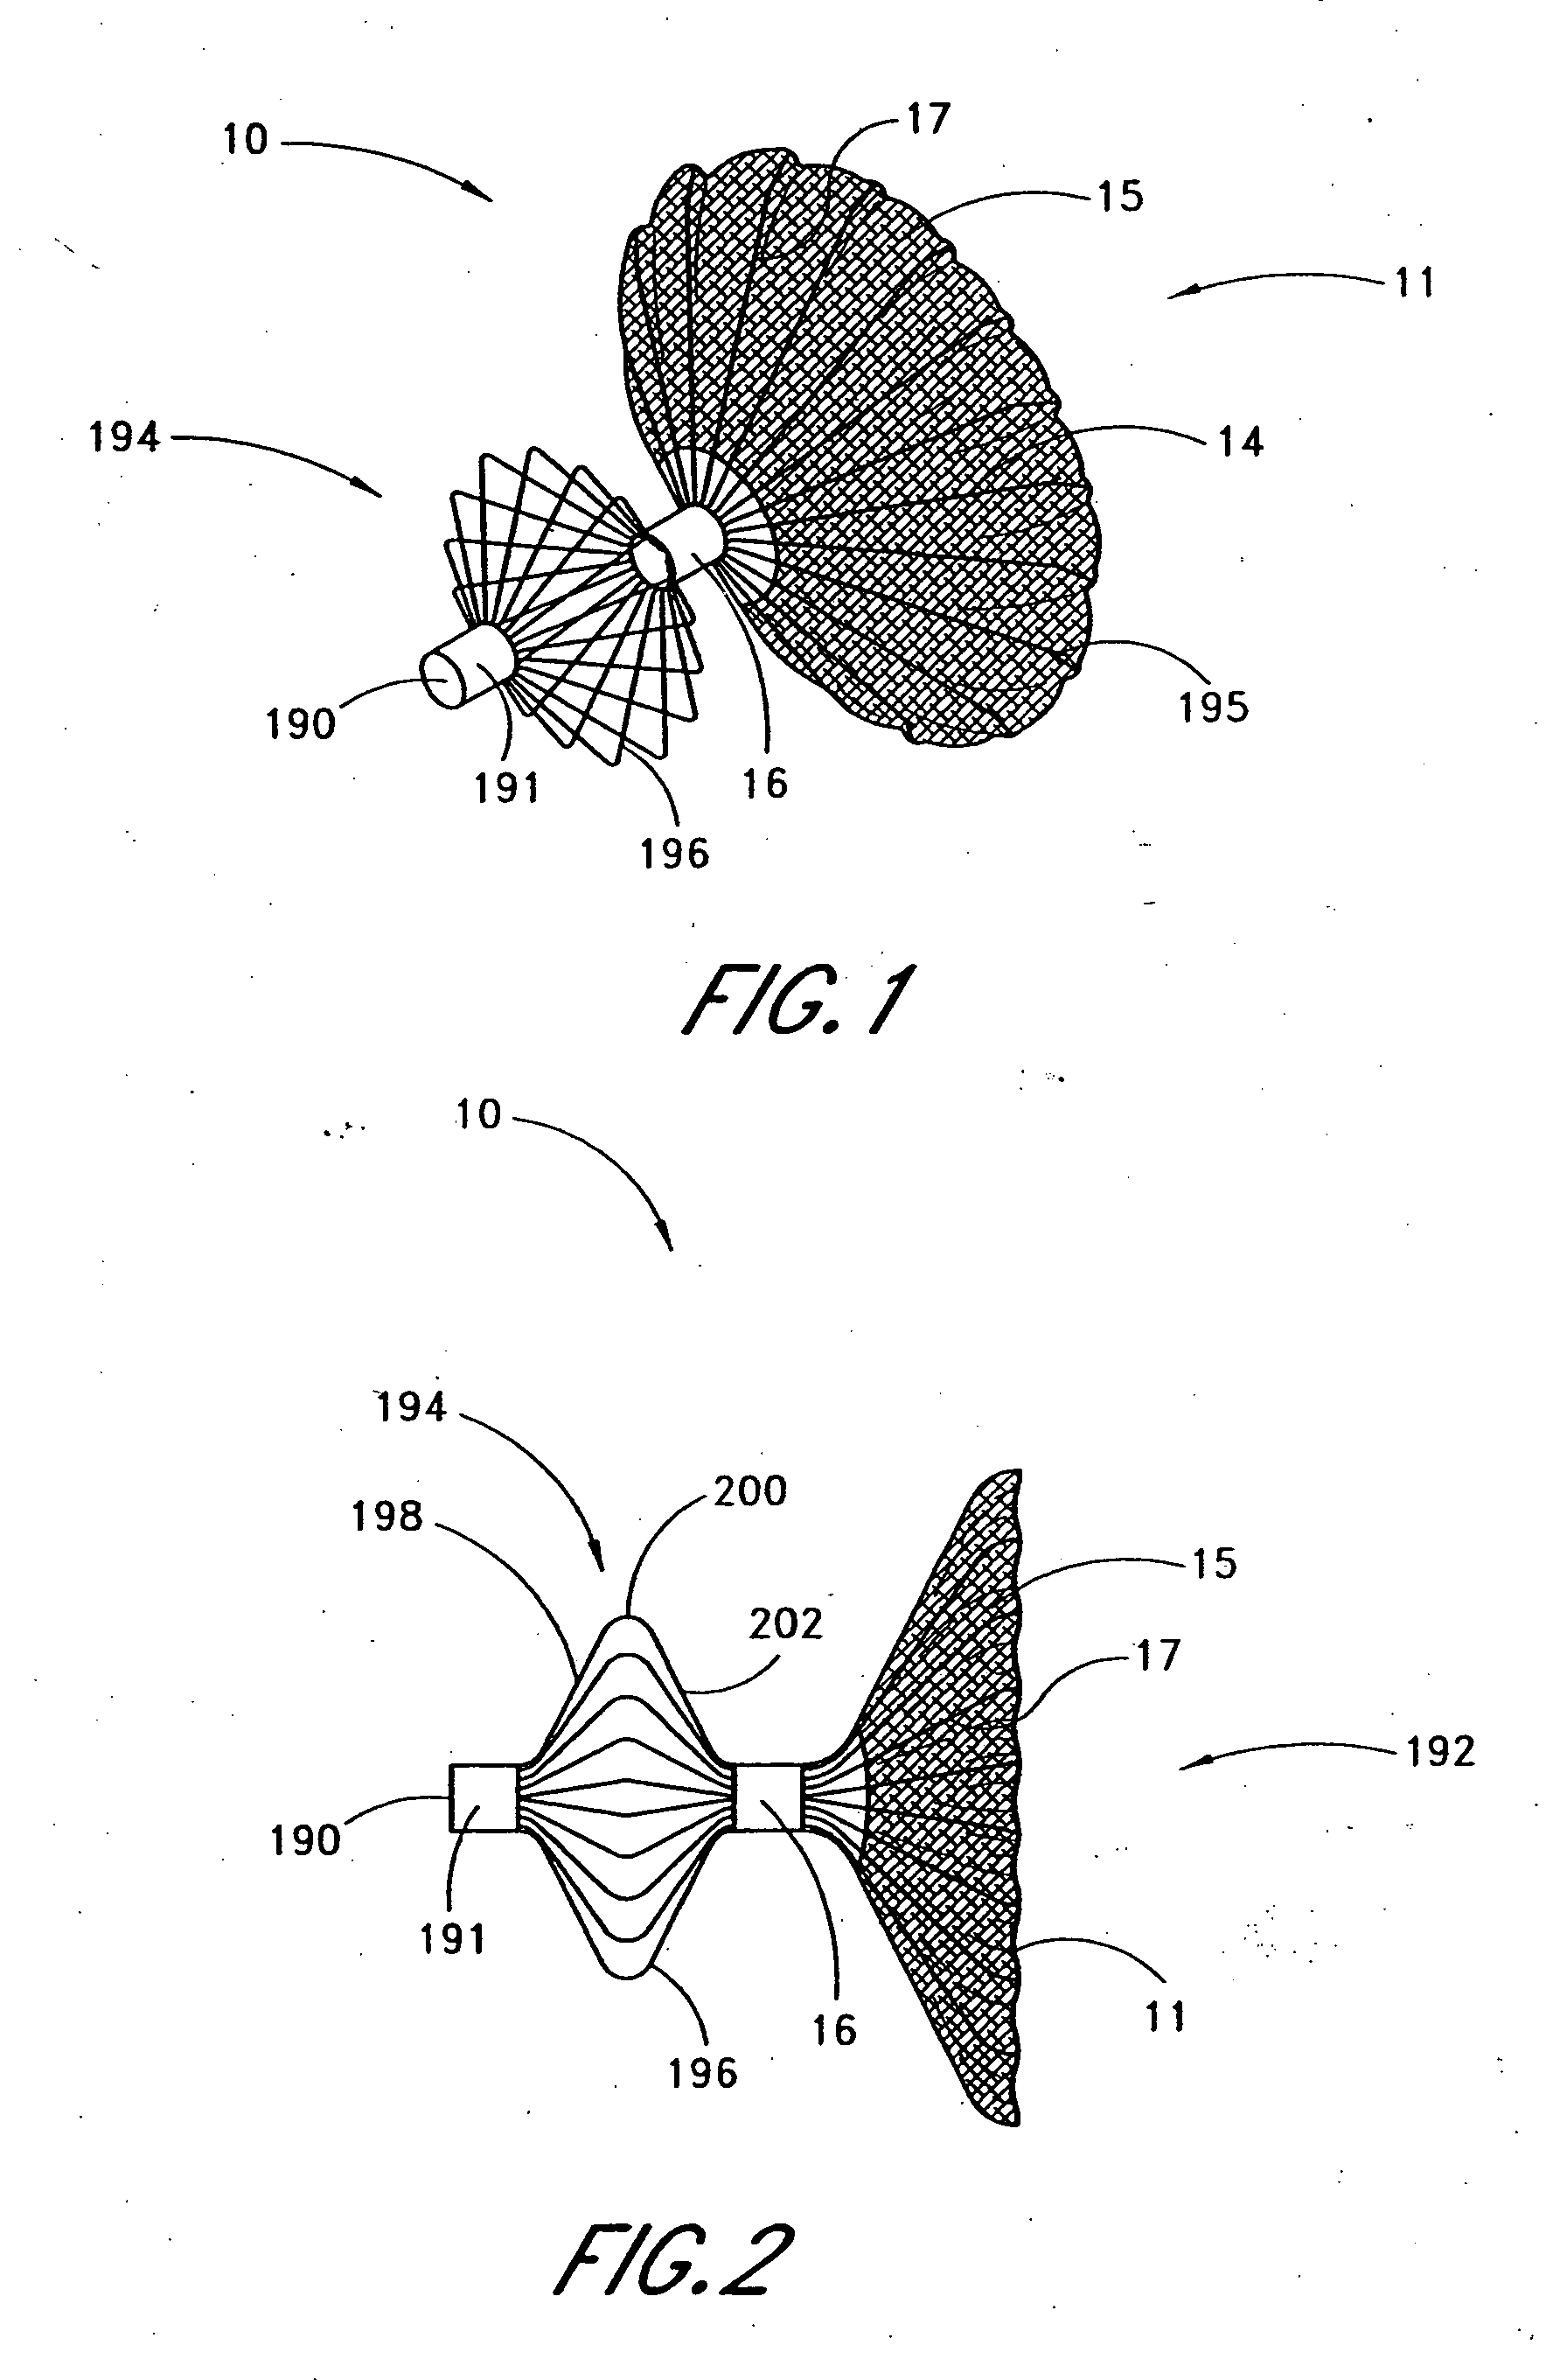 Method of implanting an adjustable occlusion device